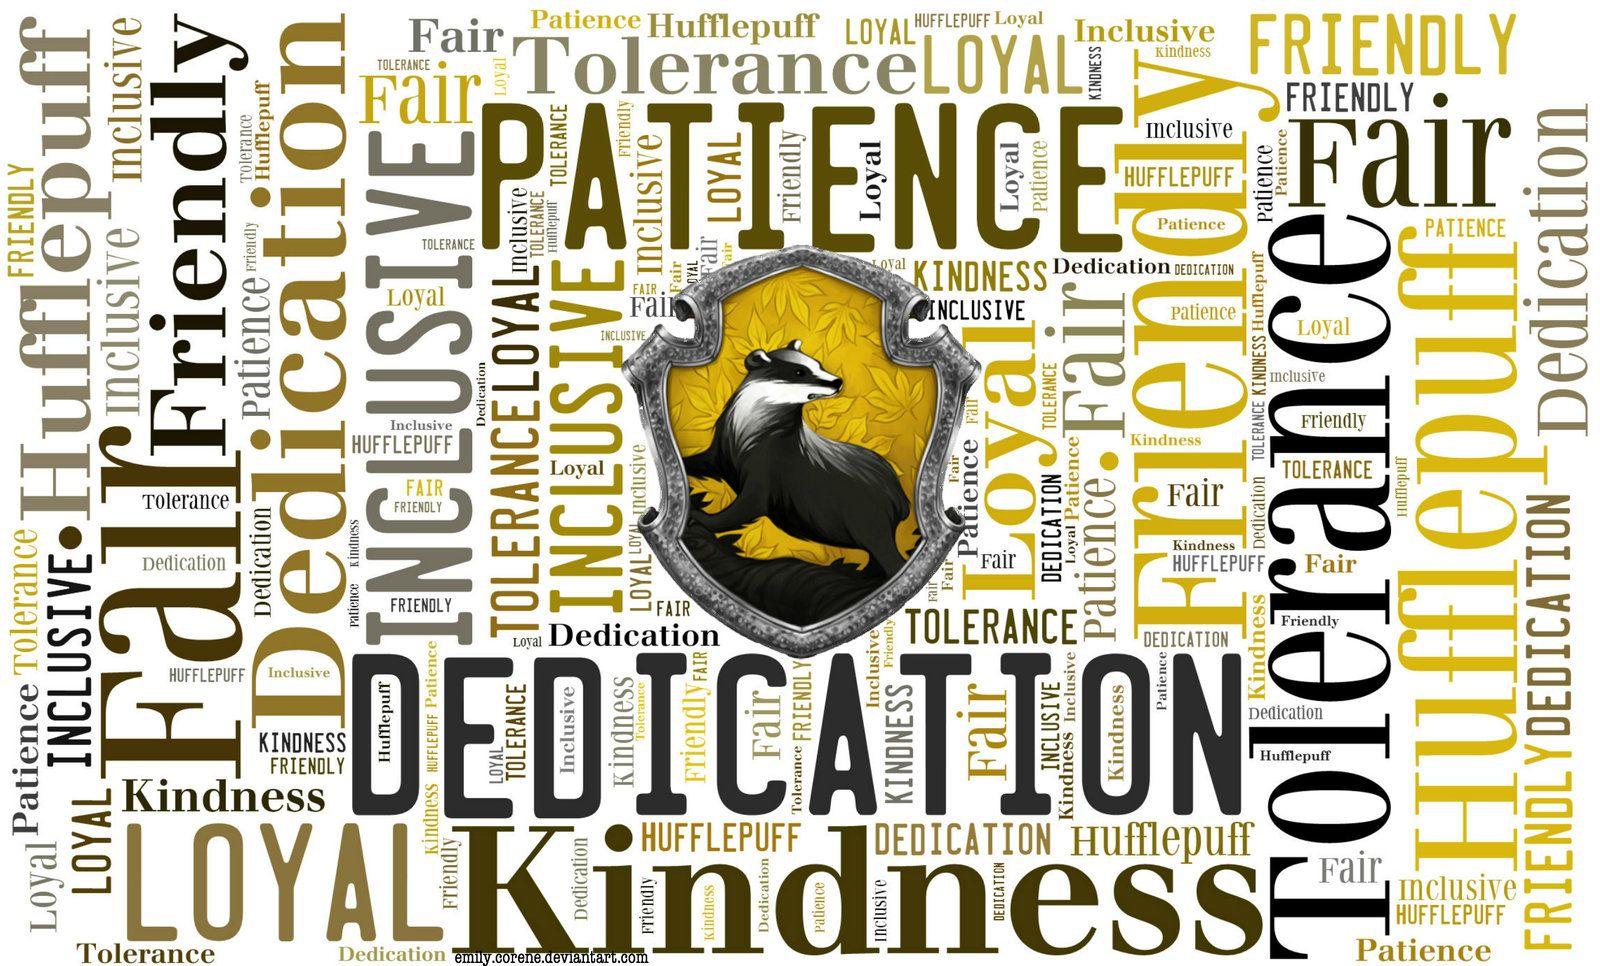 Harry Potter Forums • View topic for Hufflepuff Crest